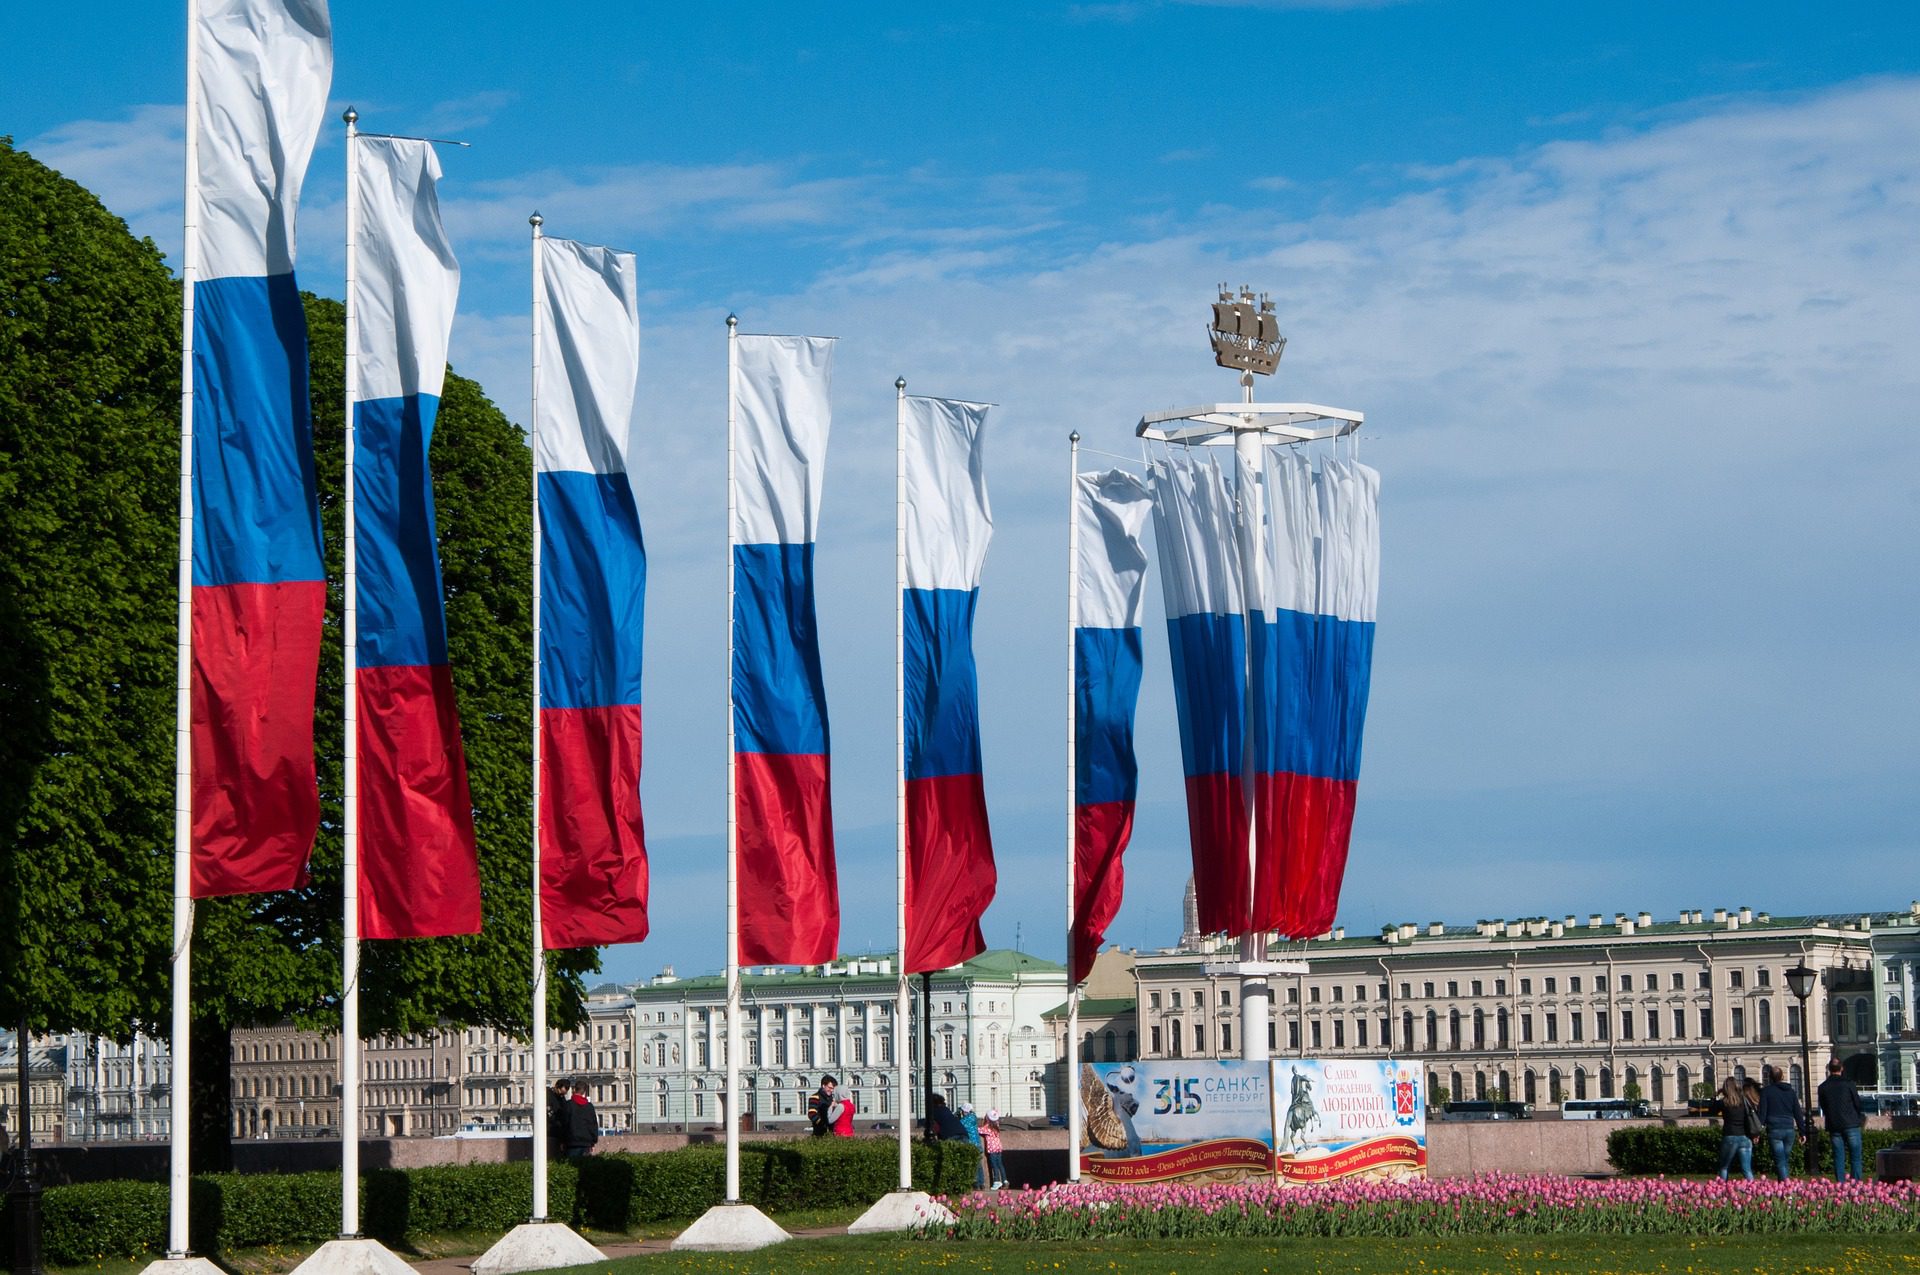 Russia approves cross-border payments with crypto
